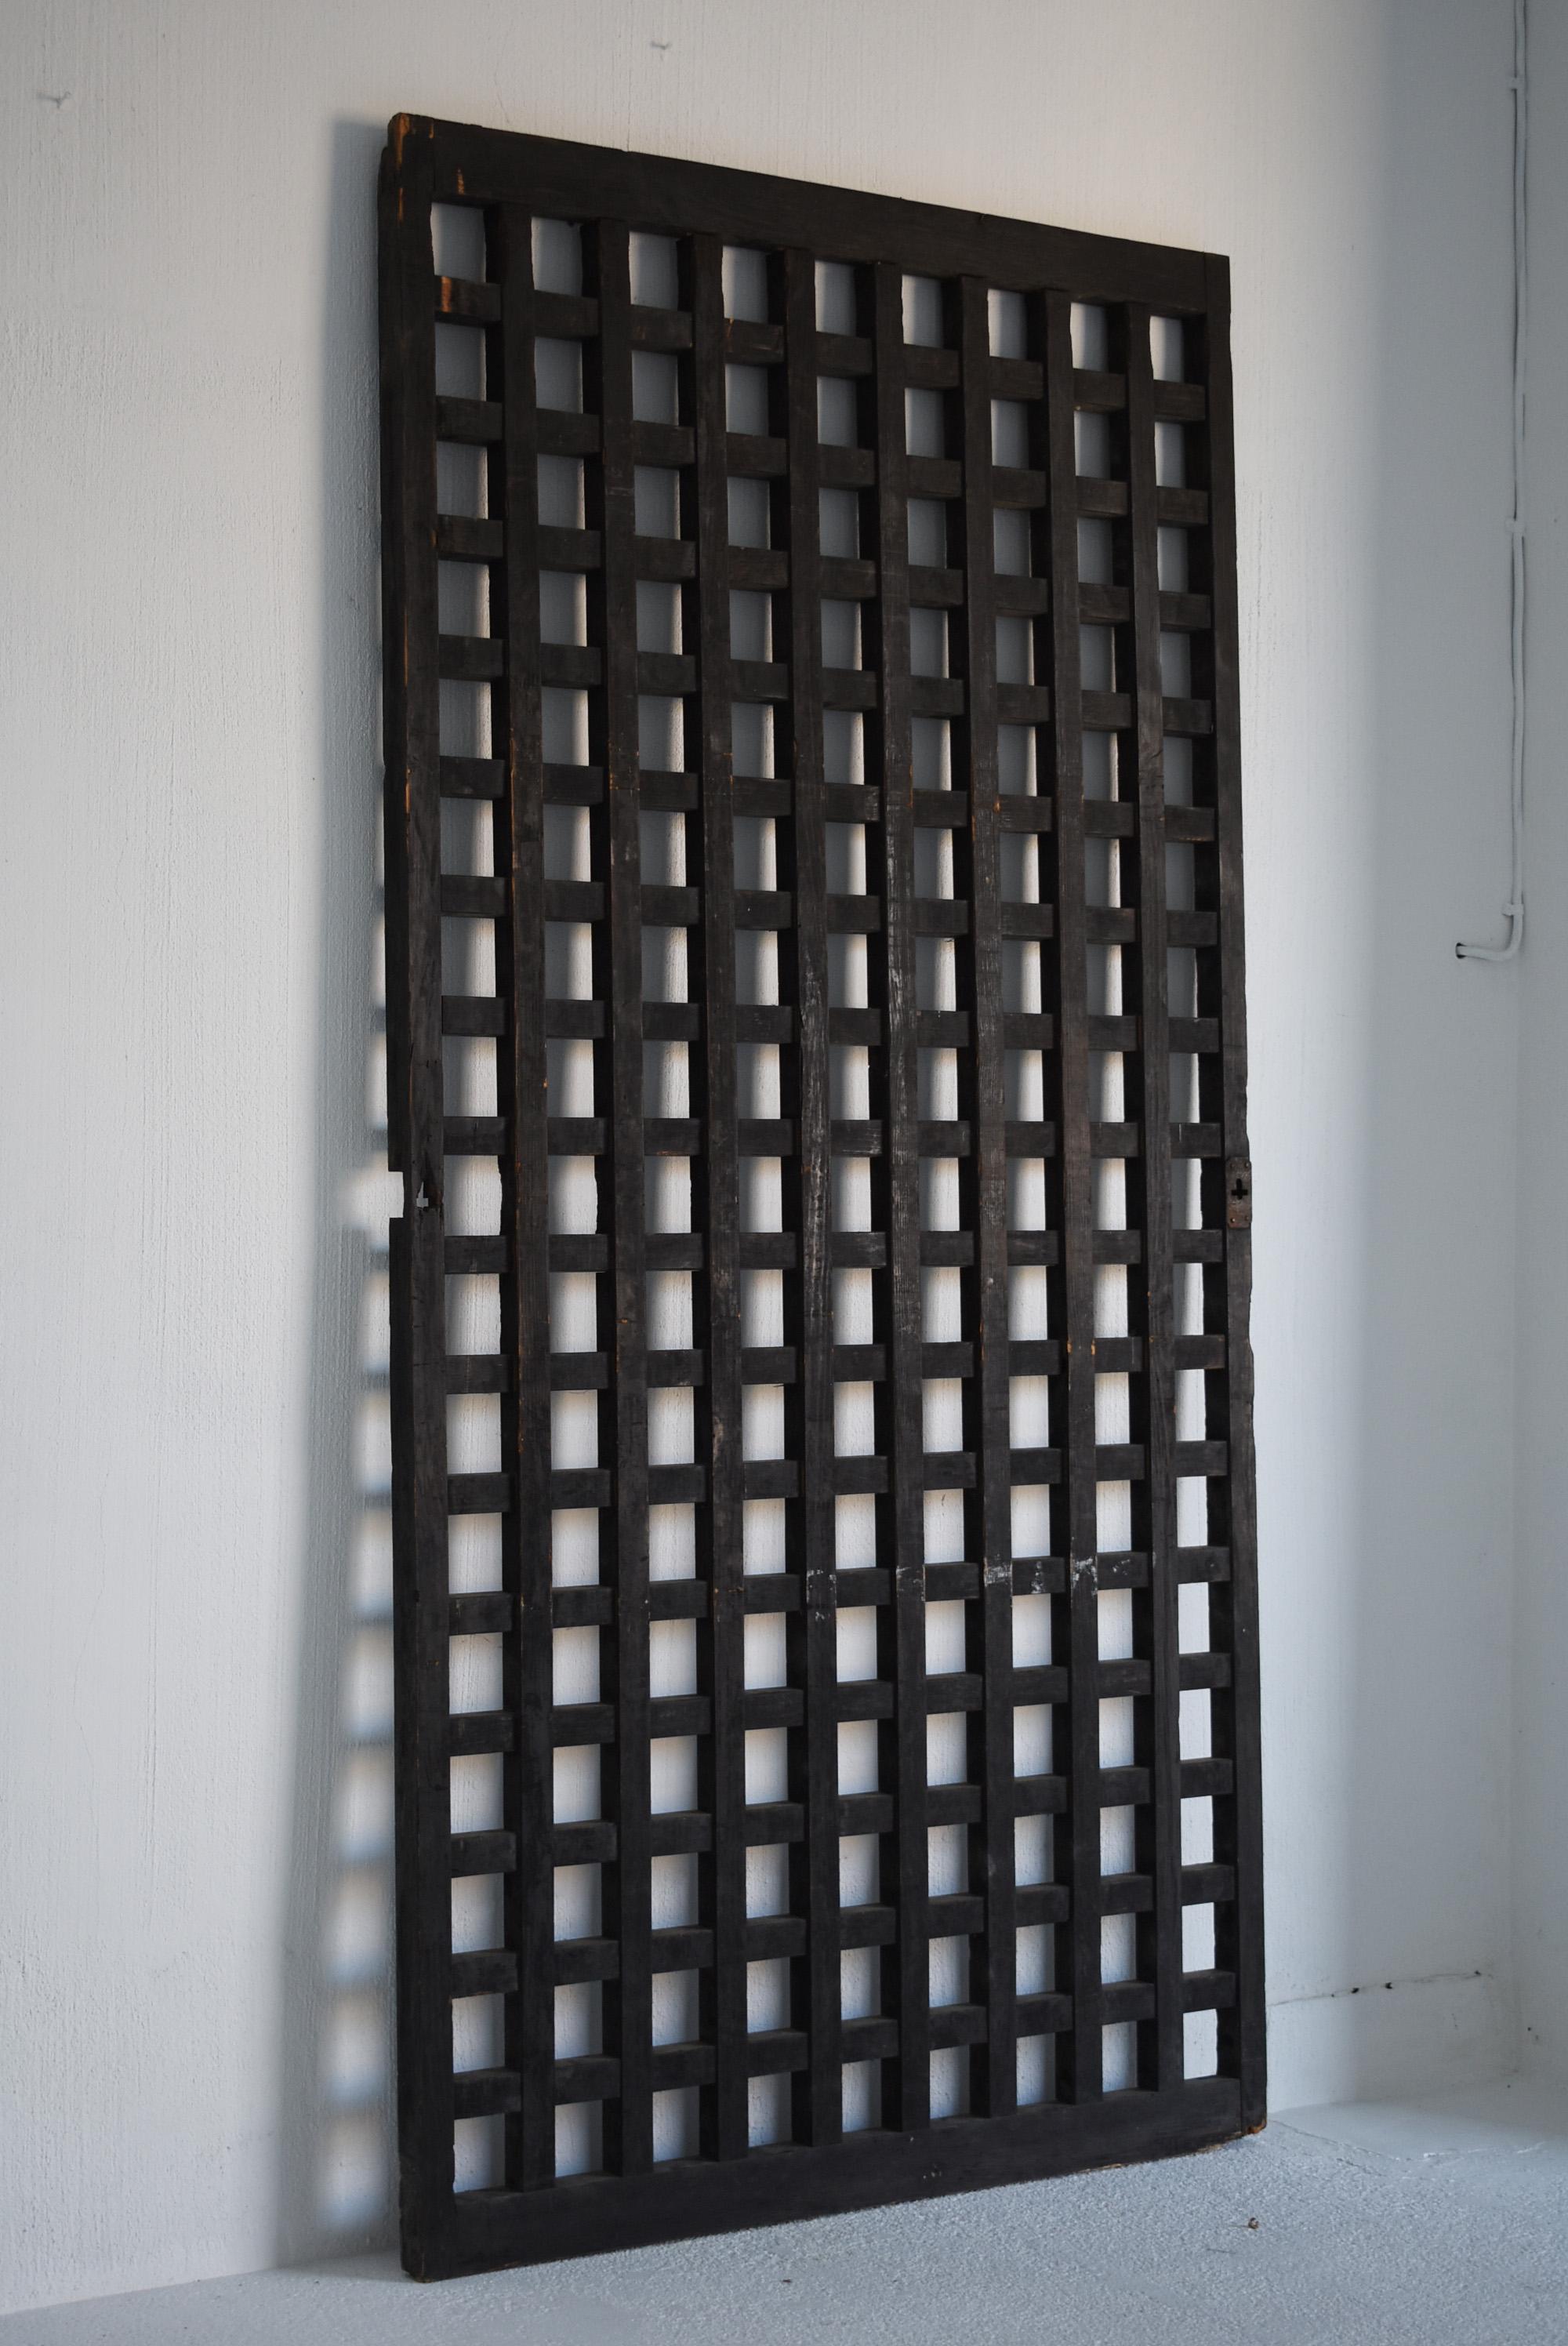 It is an old Japanese lattice door.
It is an item from the Edo period to the Meiji period.
The material seems to be cedar.

It was used as a fitting for the warehouse.

It's a very valuable door.

You can actually use it, but it is also